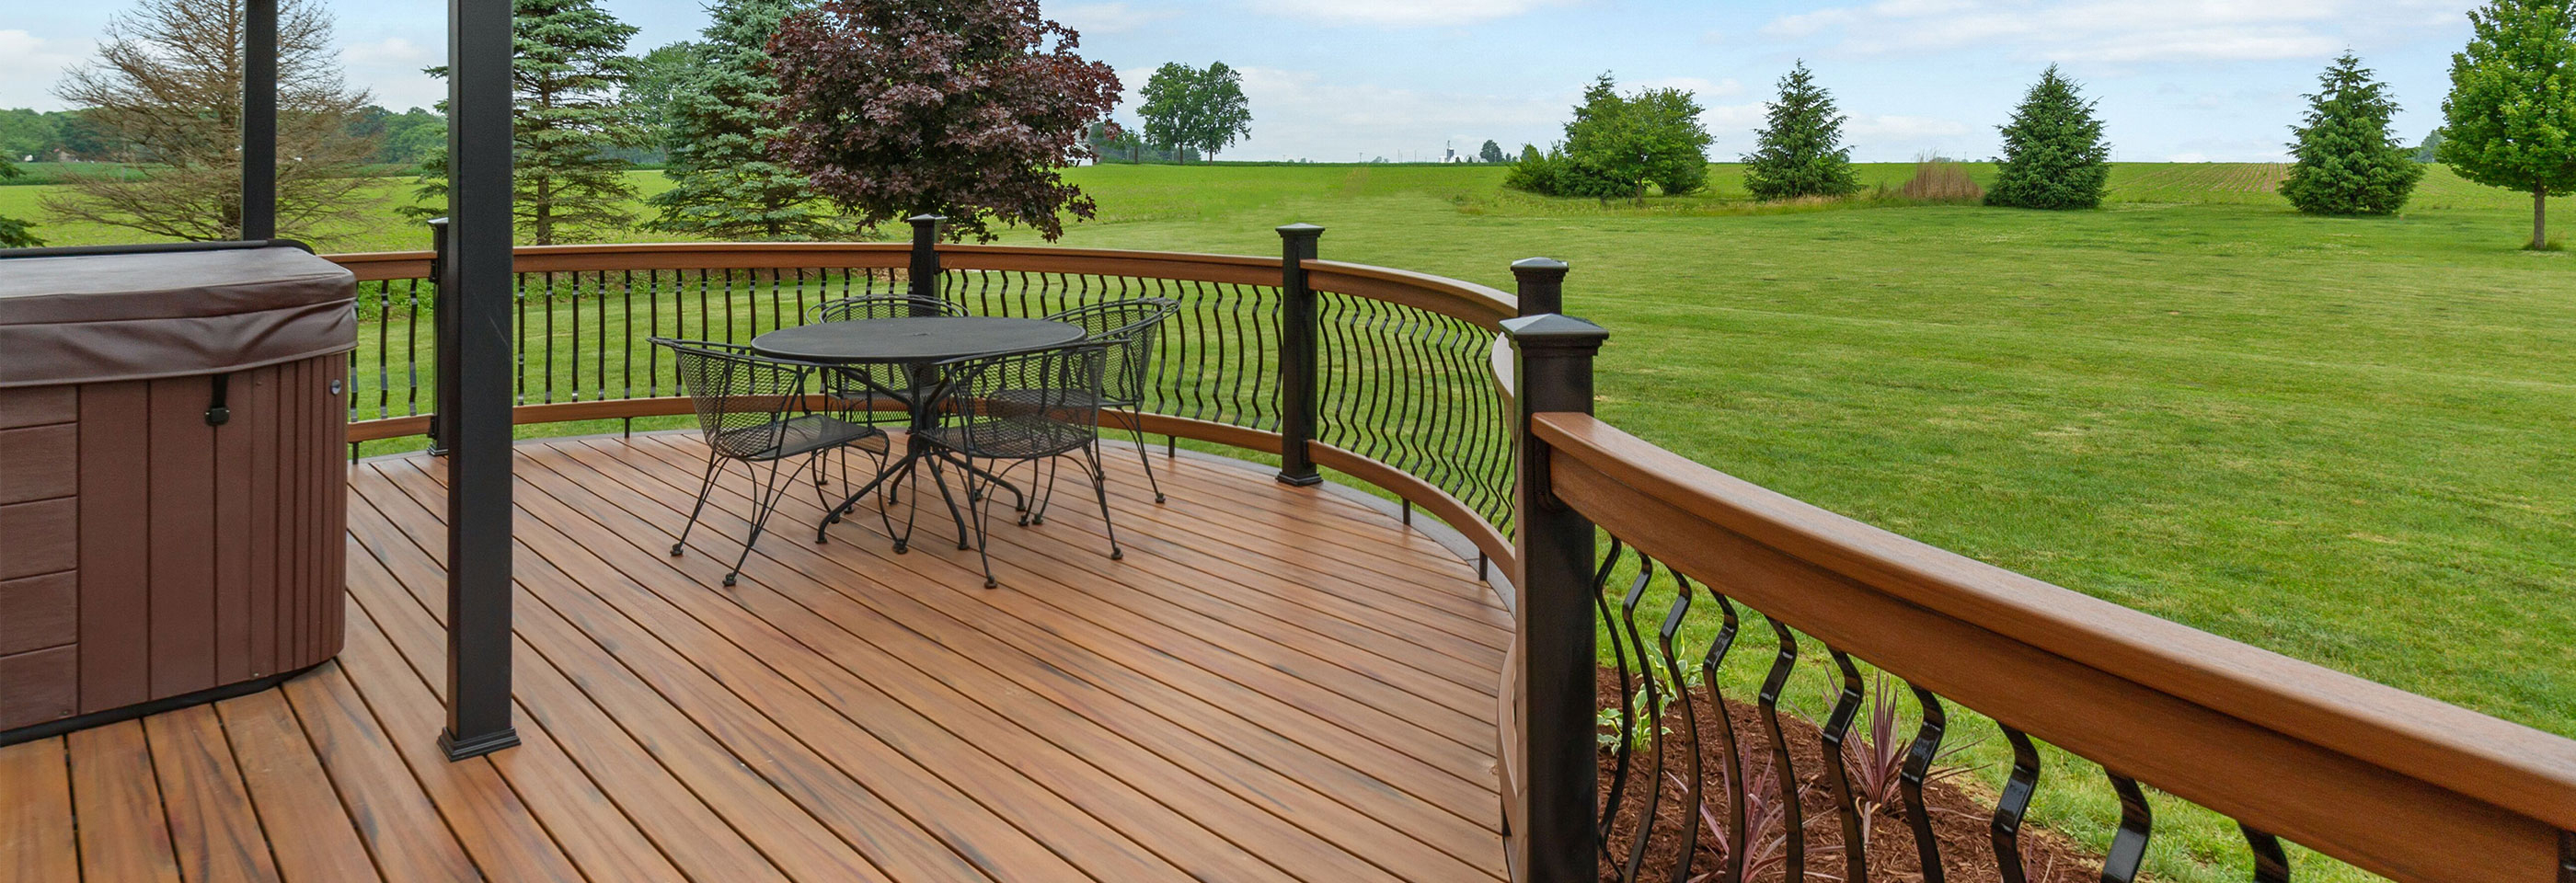 Armadillo Deck Composite Decking Designed For Beauty Made For in sizing 2800 X 960